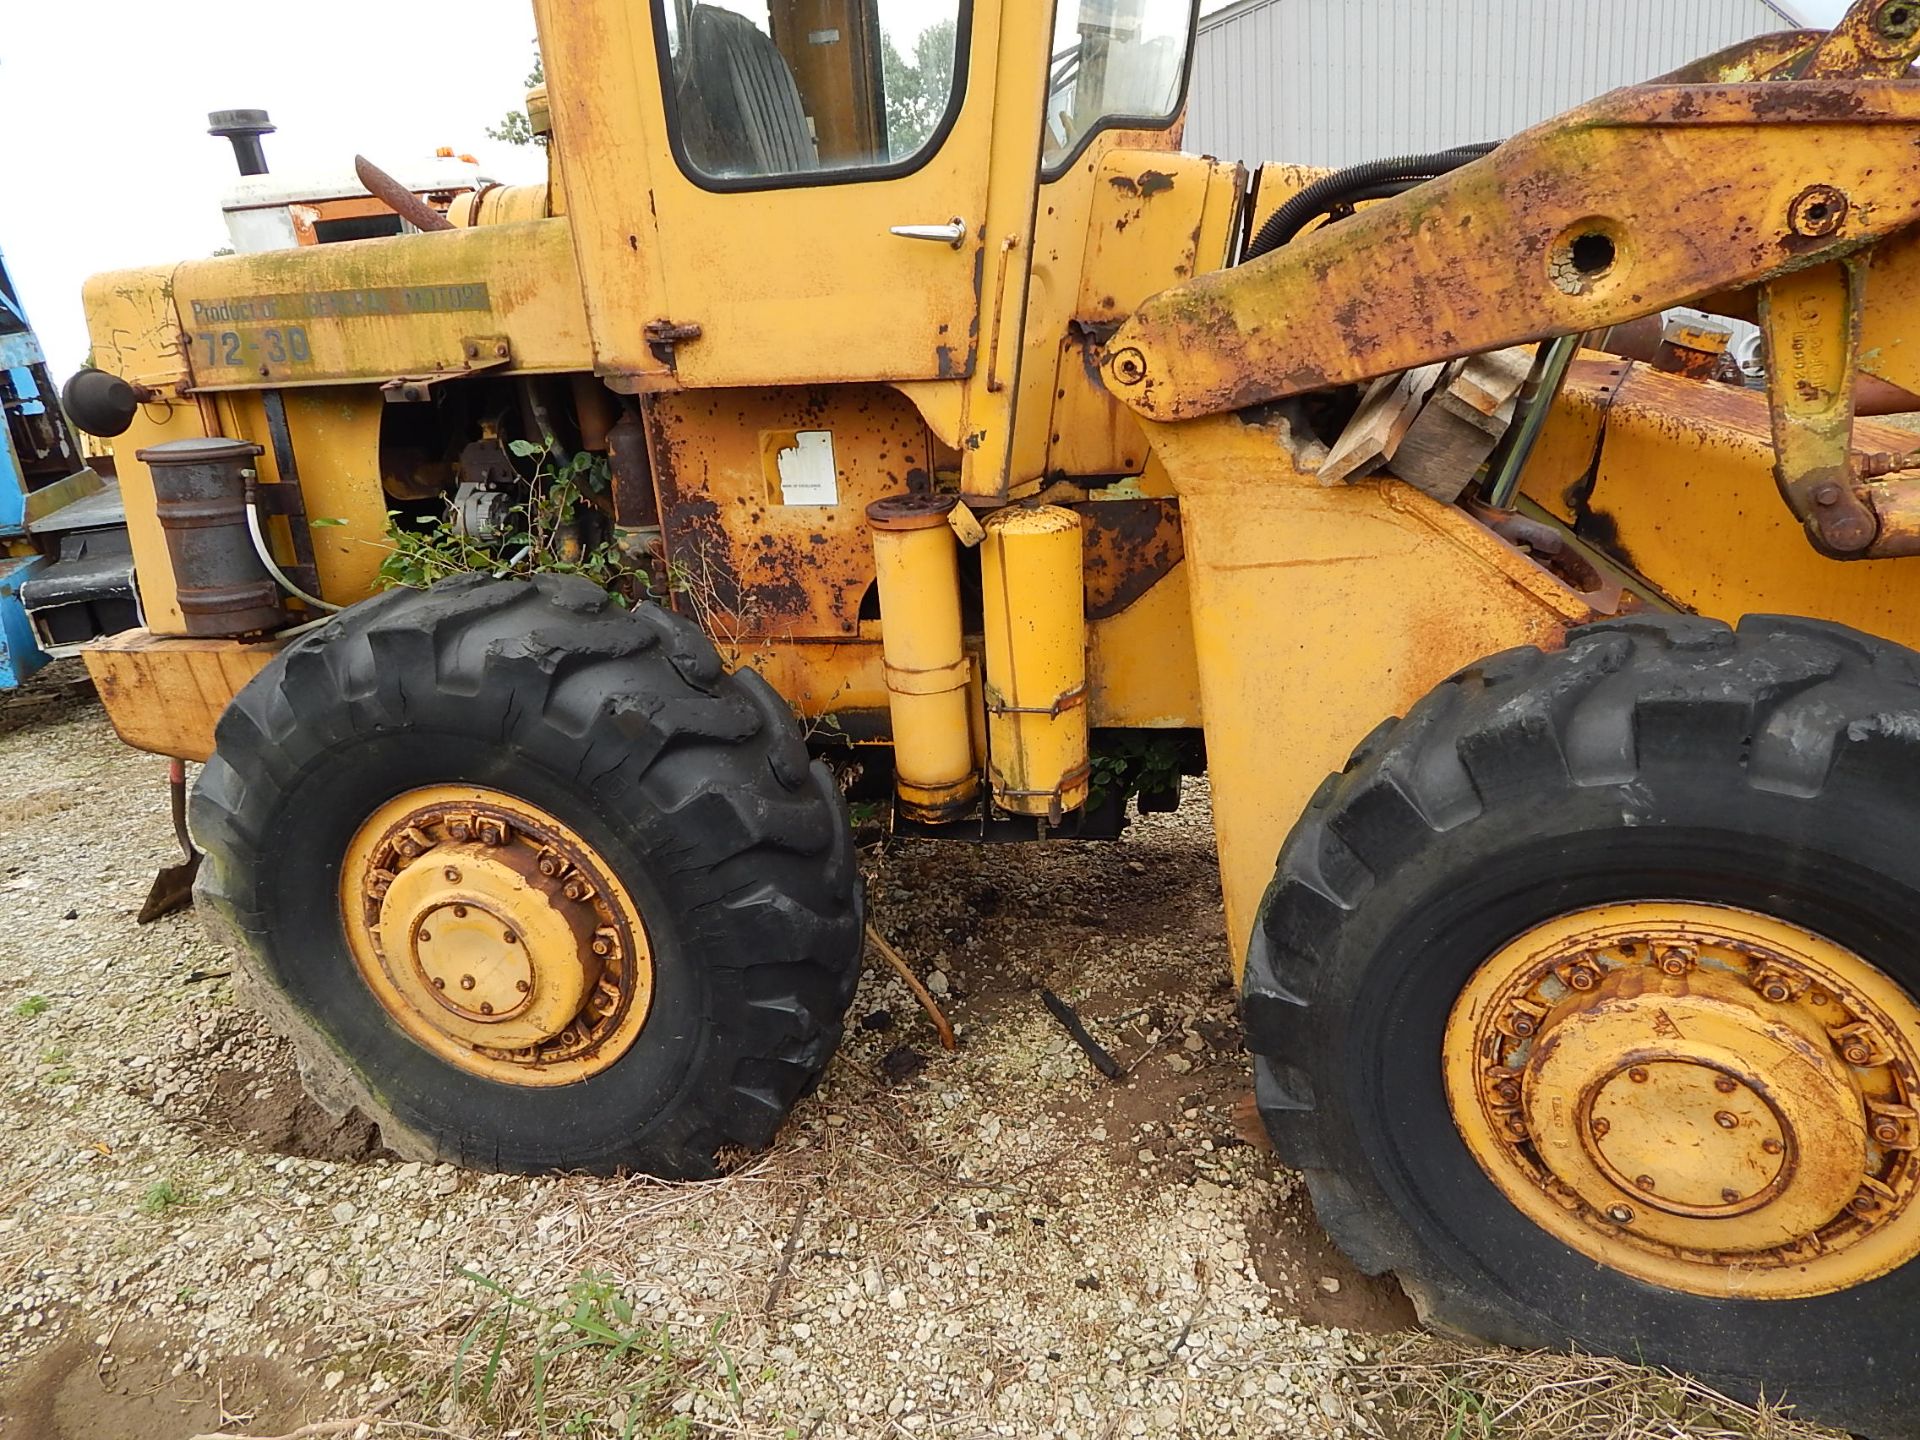 Terex/Euclid 72-30 Rubber Tired Loader, 8 ft Bucket, 2148 Hours, s/n 16UPM40248, Not in Service - Image 5 of 12